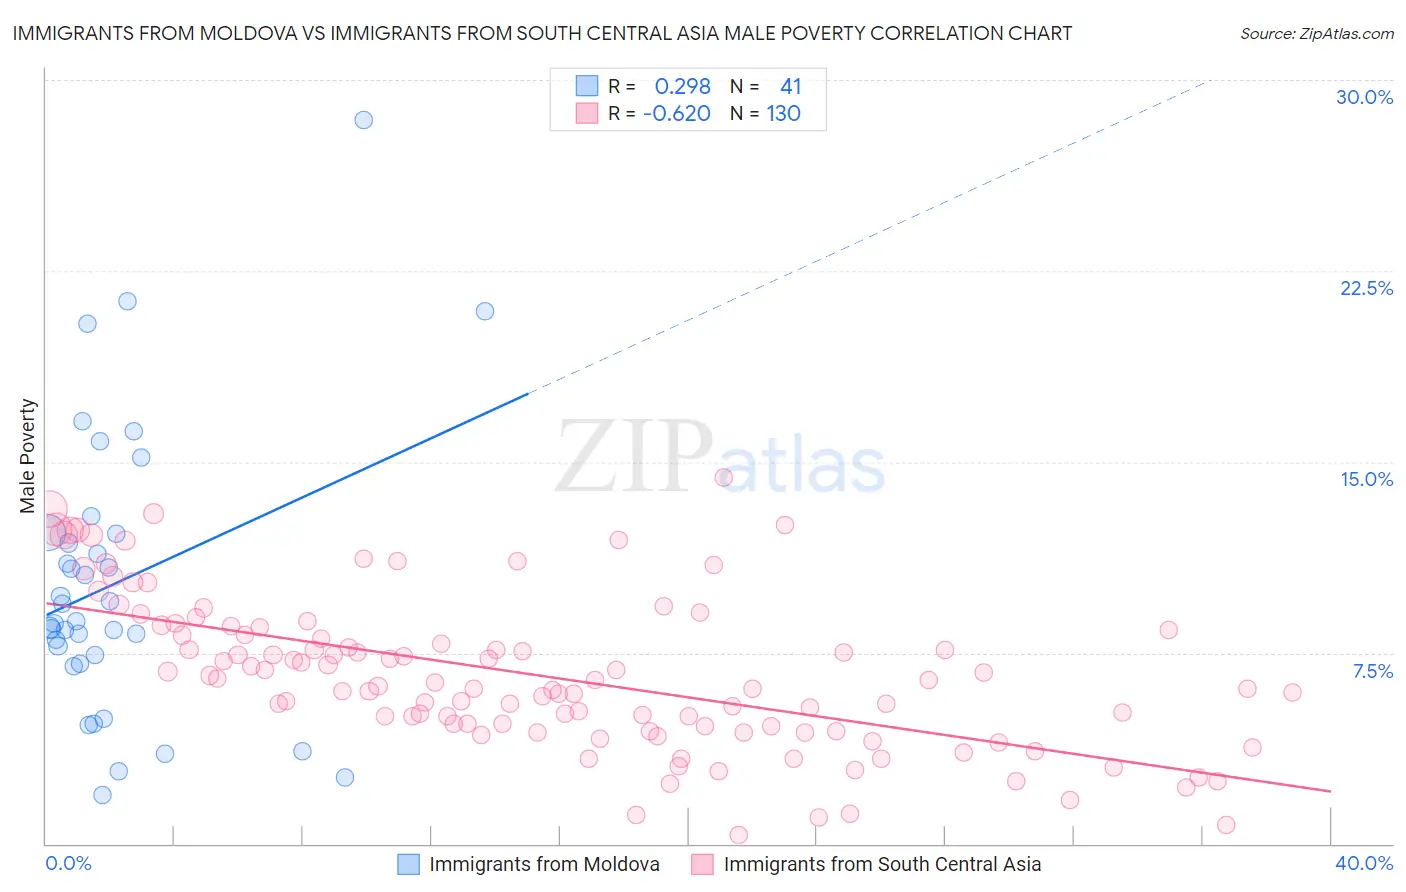 Immigrants from Moldova vs Immigrants from South Central Asia Male Poverty